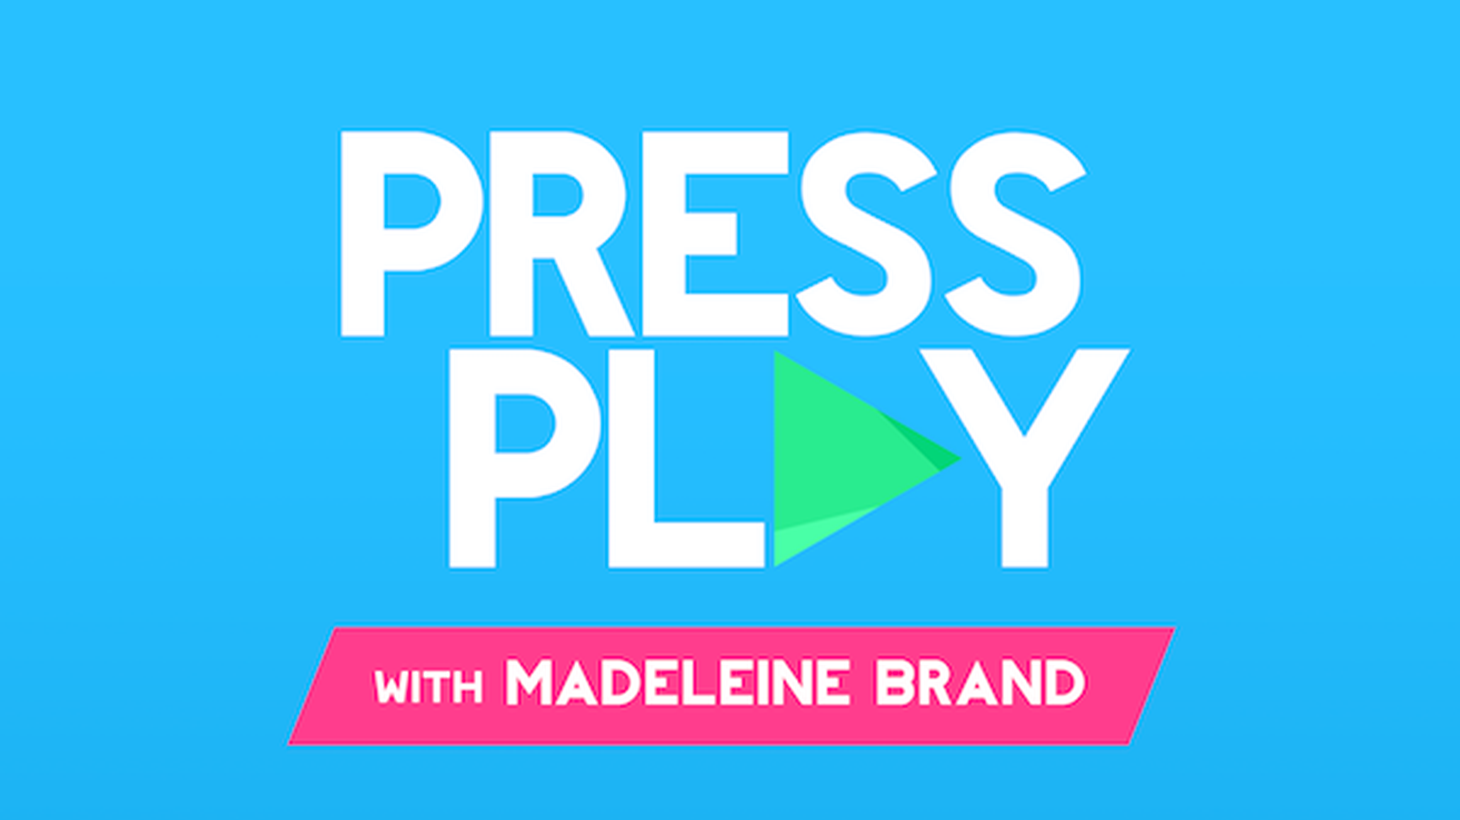 Today on Press Play, we let music do the talking. Madeleine and KCRW’s Eric J. Lawrence spin their favorite holiday tunes.